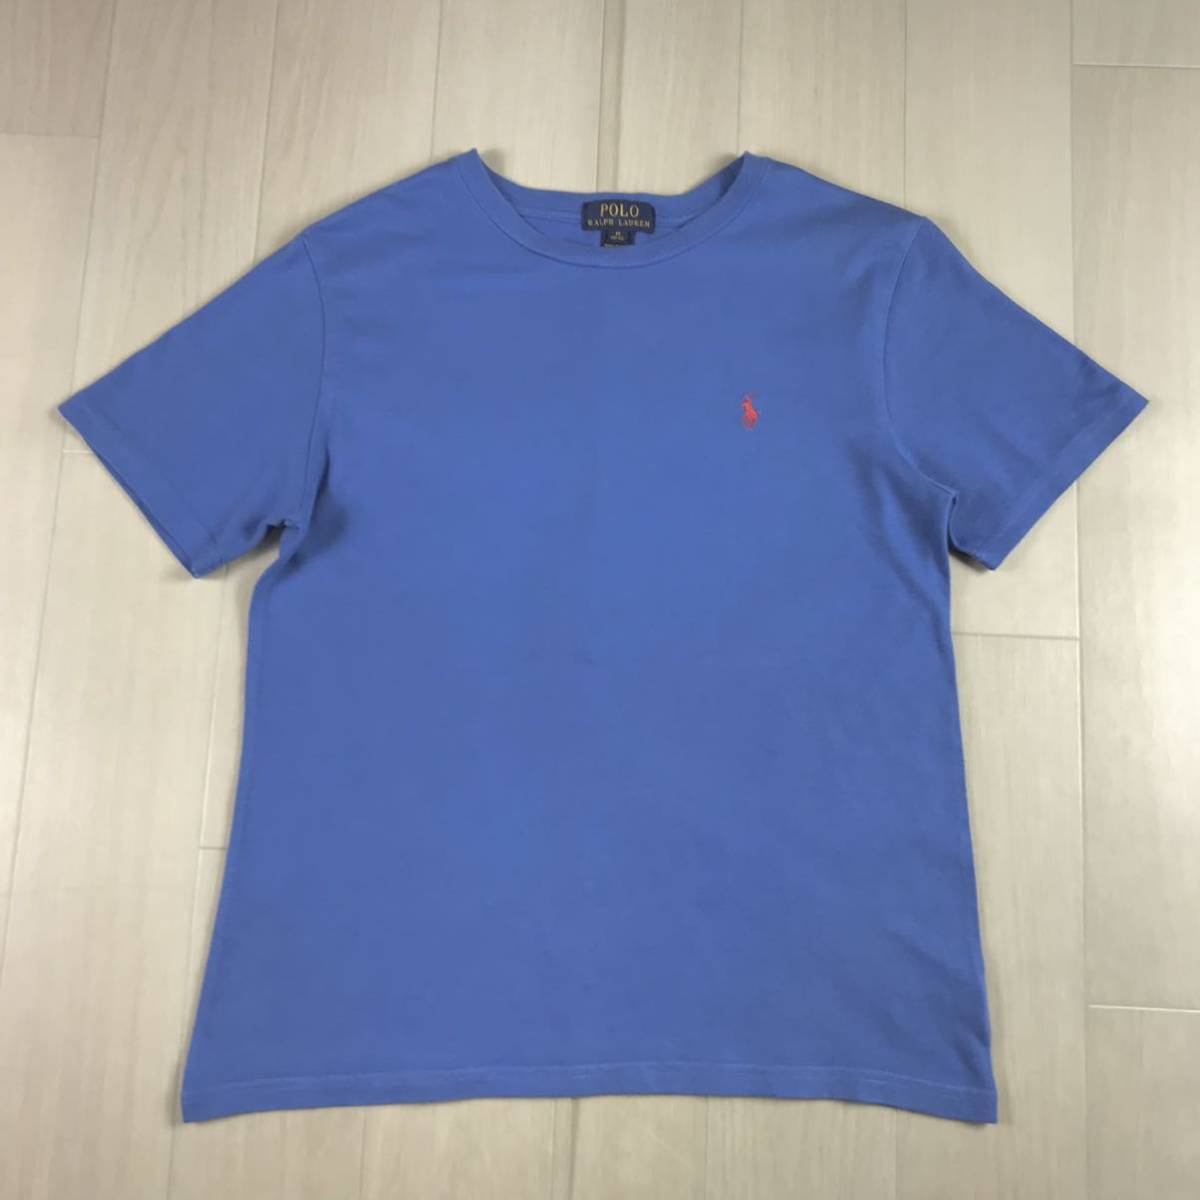 POLO RALPH LAUREN short sleeves T-shirt M(10-12) blue embroidery po knee Youth size 